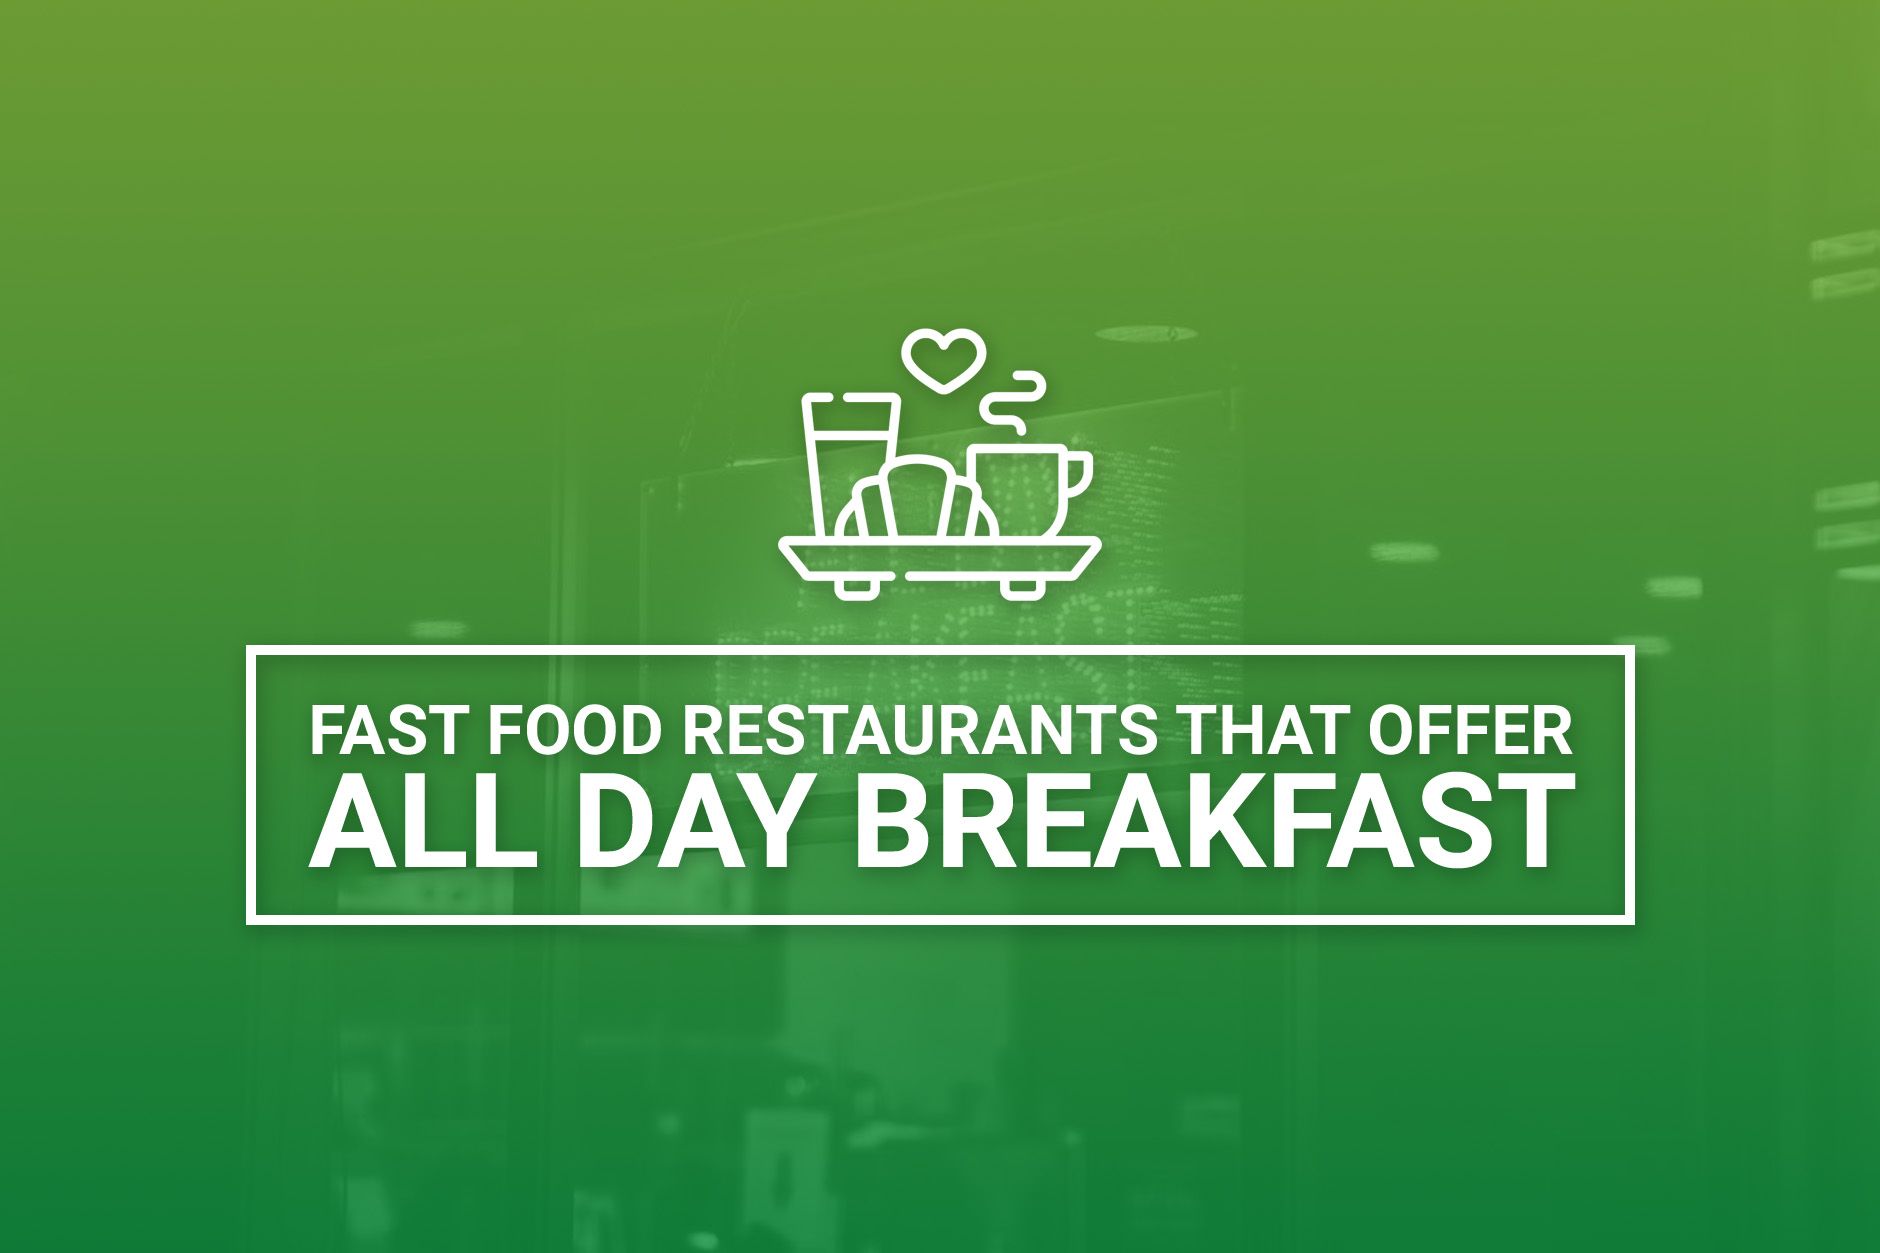 Fast Food Restaurants That Offer All Day Breakfast